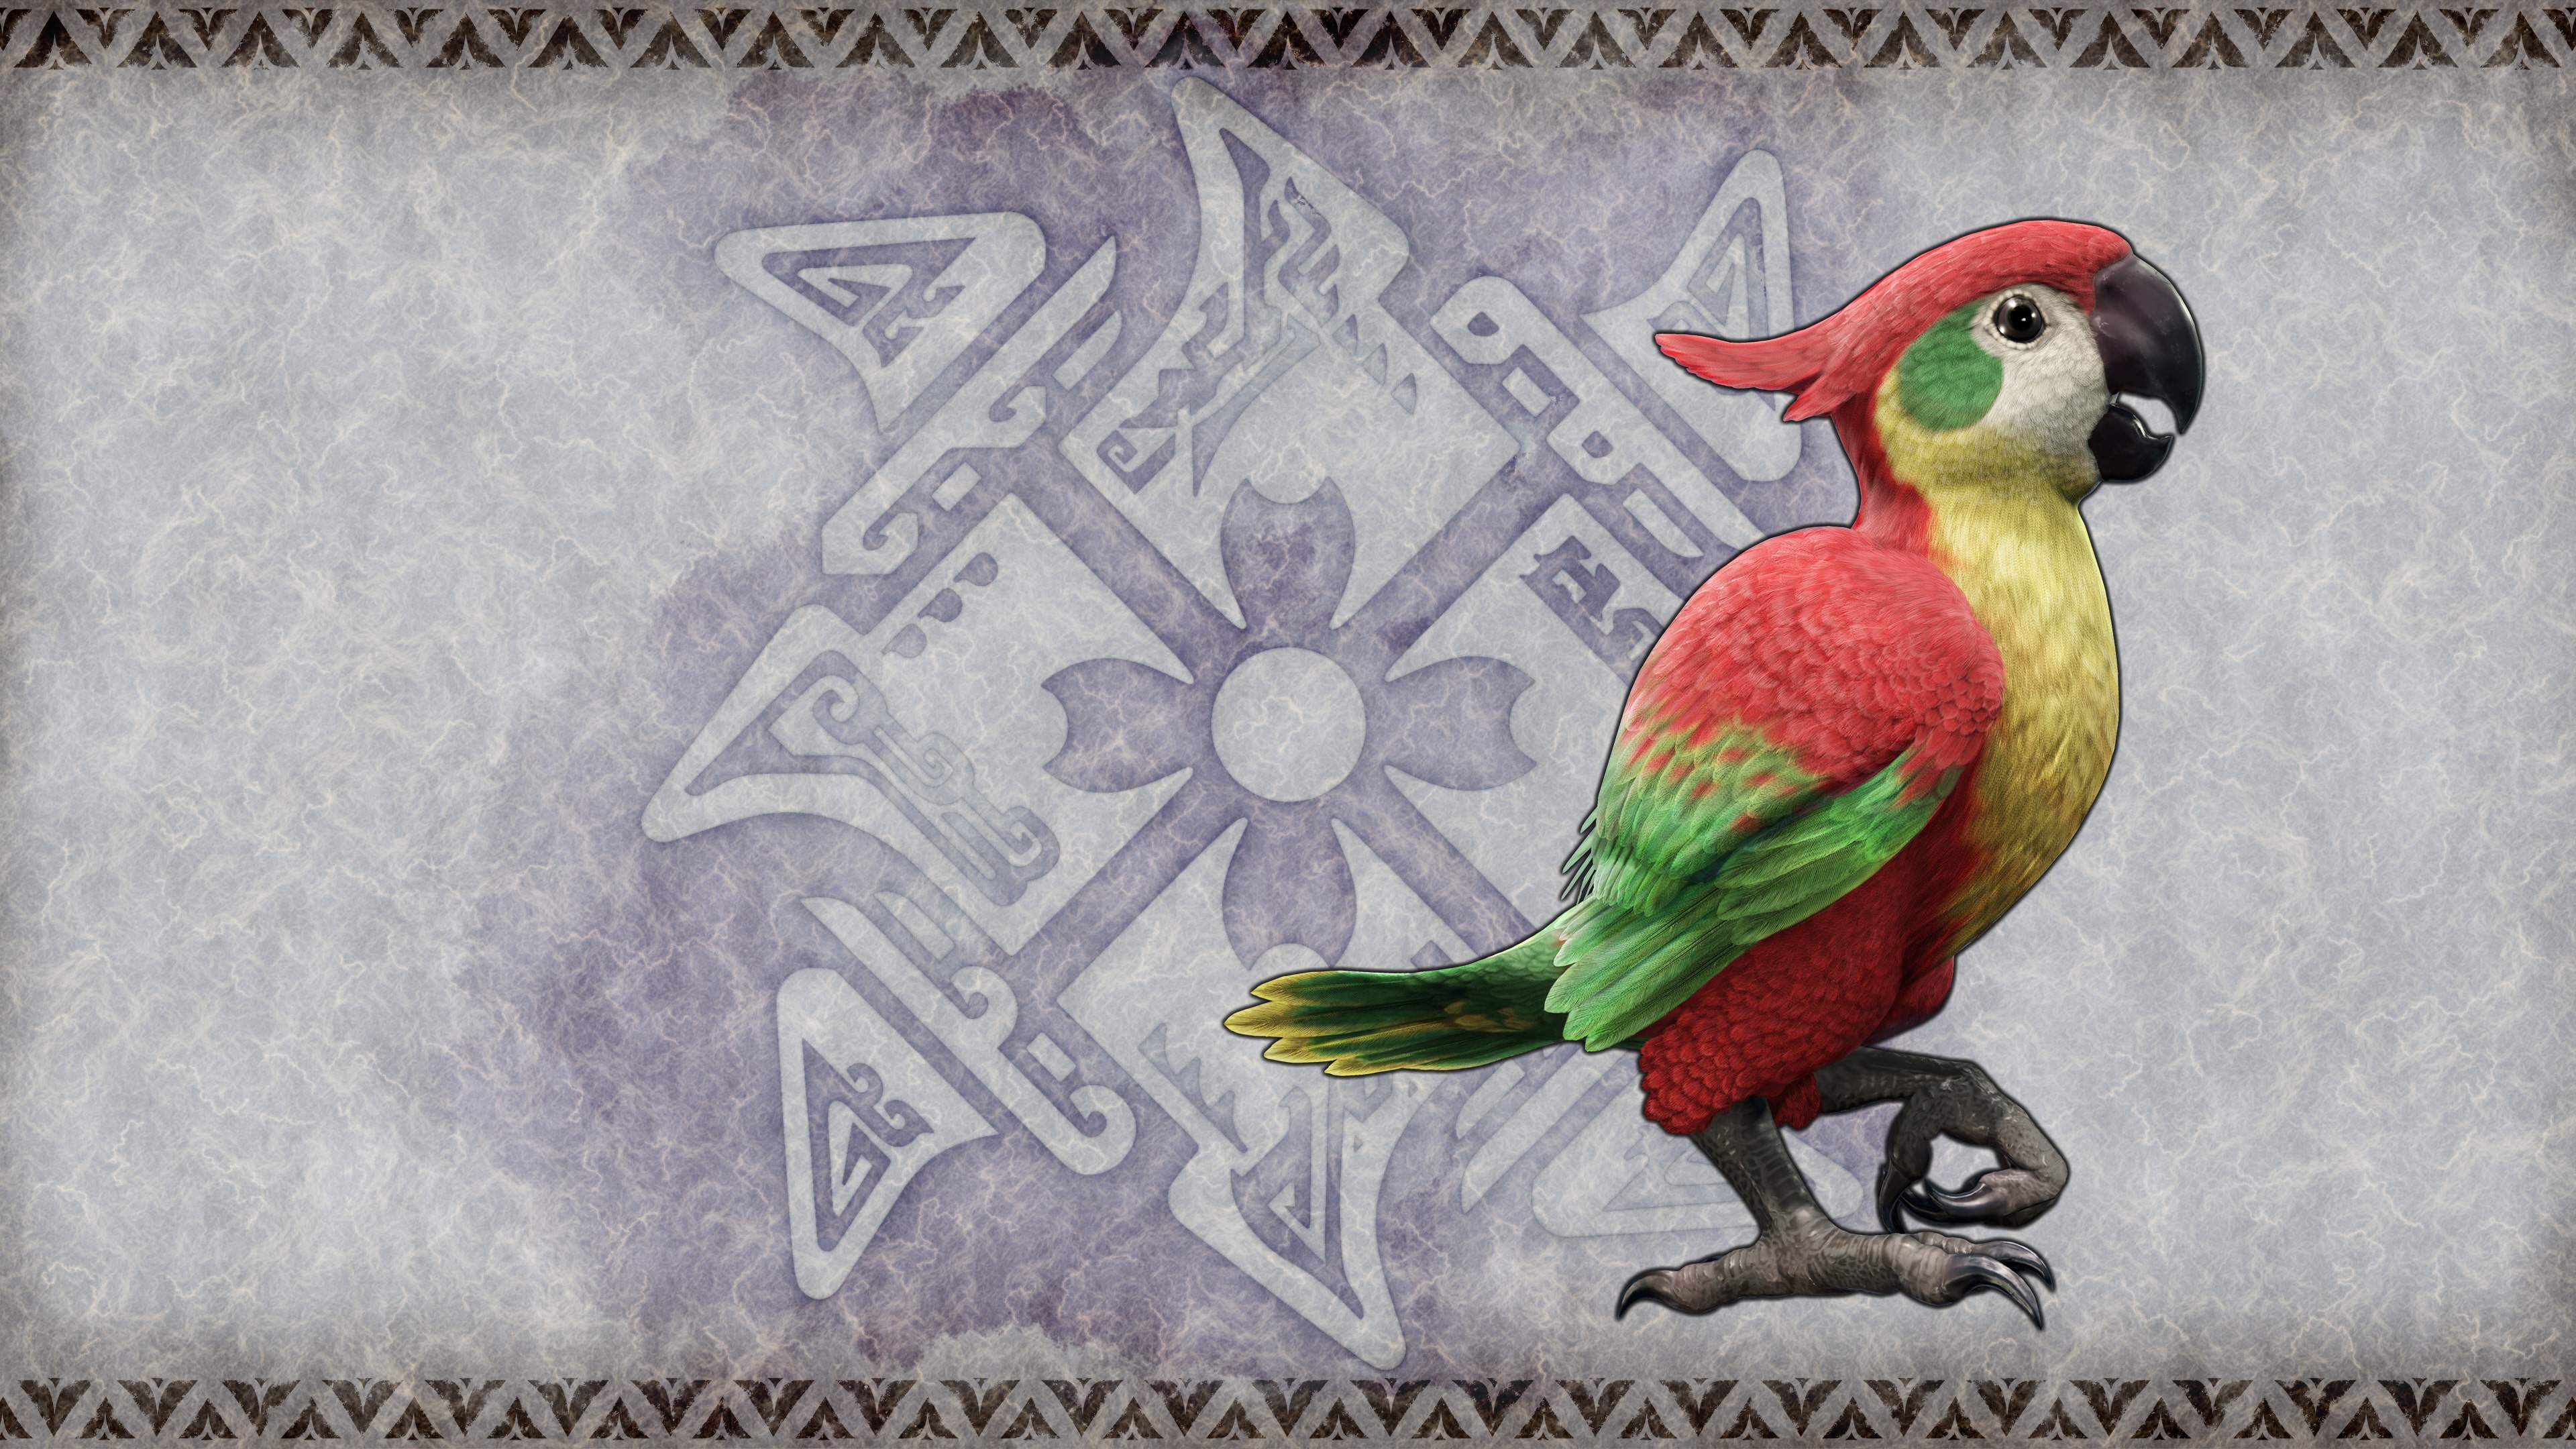 Monster Hunter Rise - "Menacing Macaw" Cohoot outfit